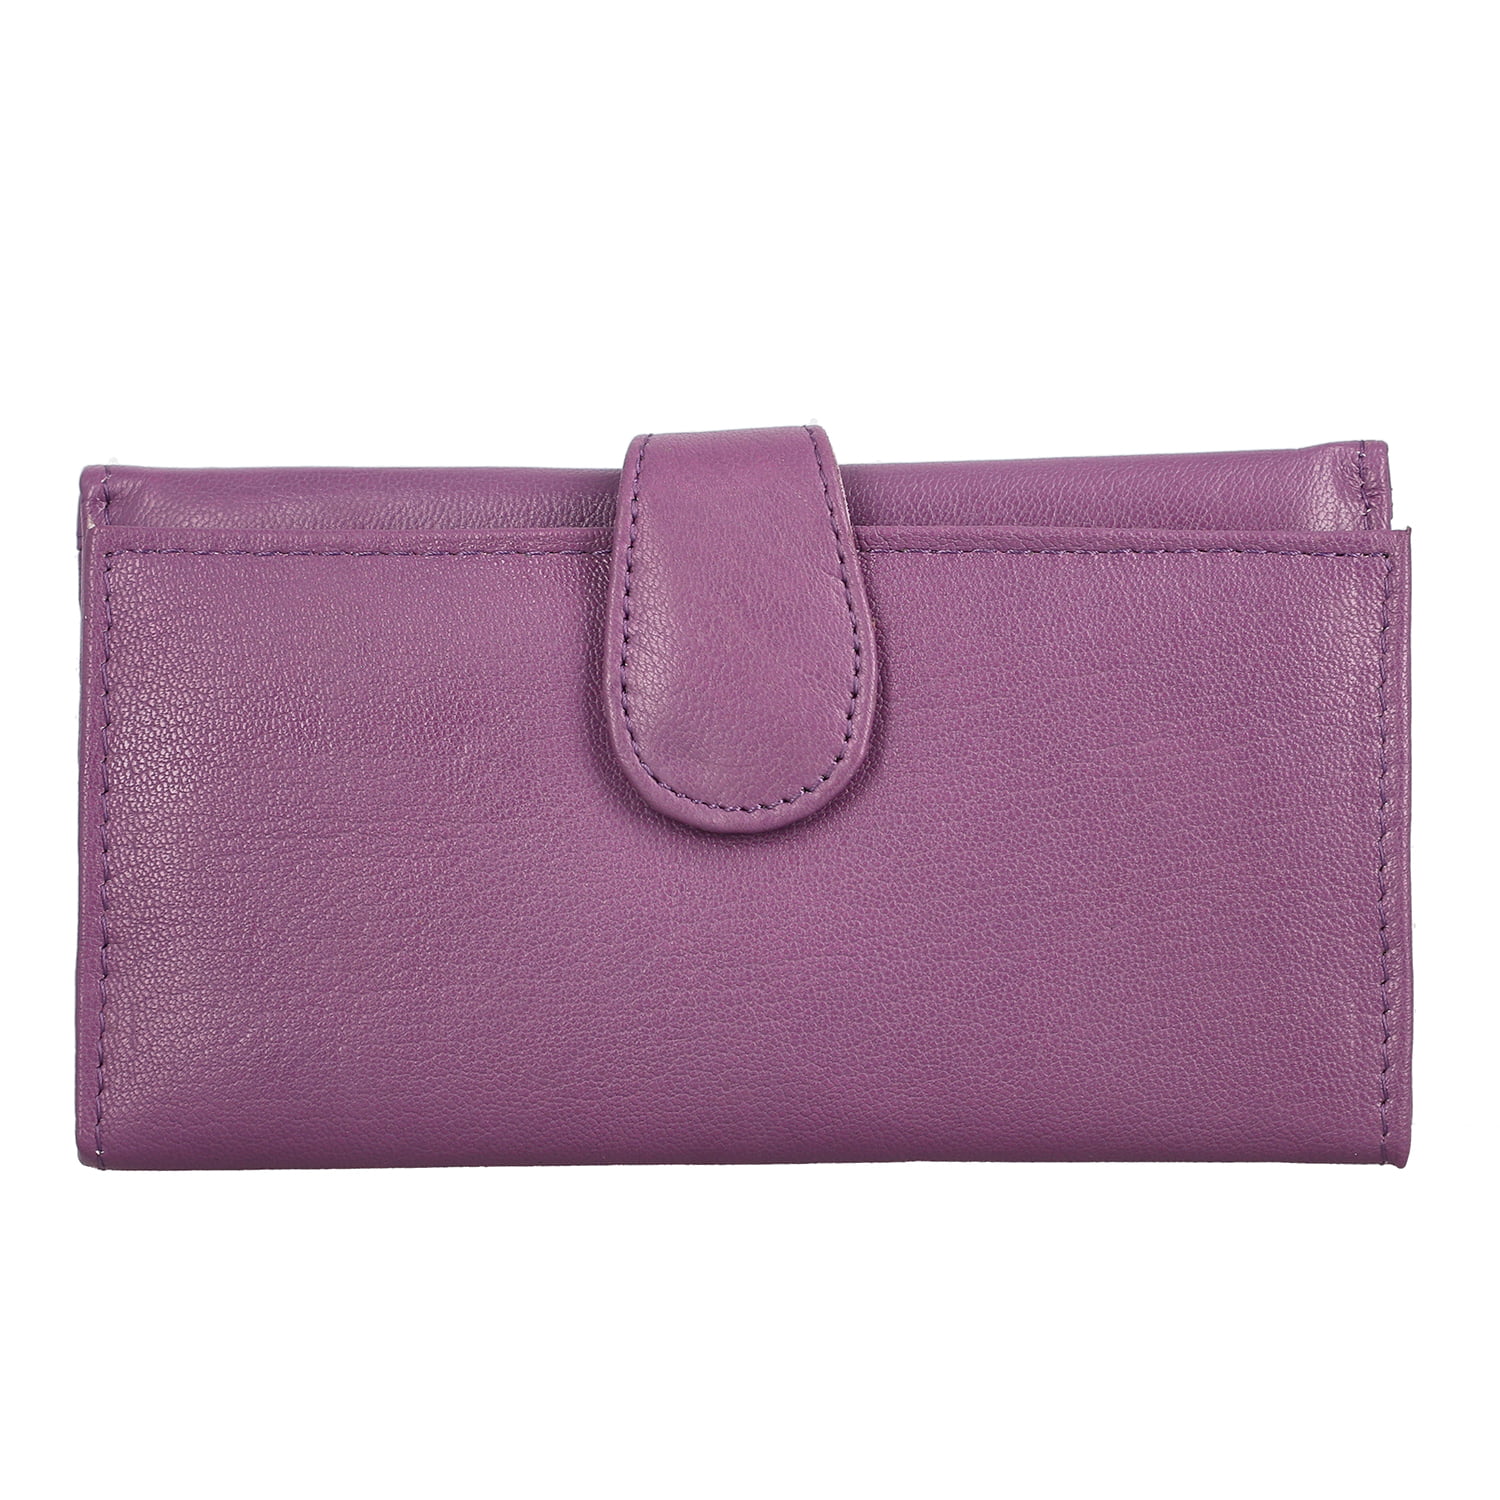 Shop LC Passage Women Handcrafted Purple Genuine Leather RFID Protected ...